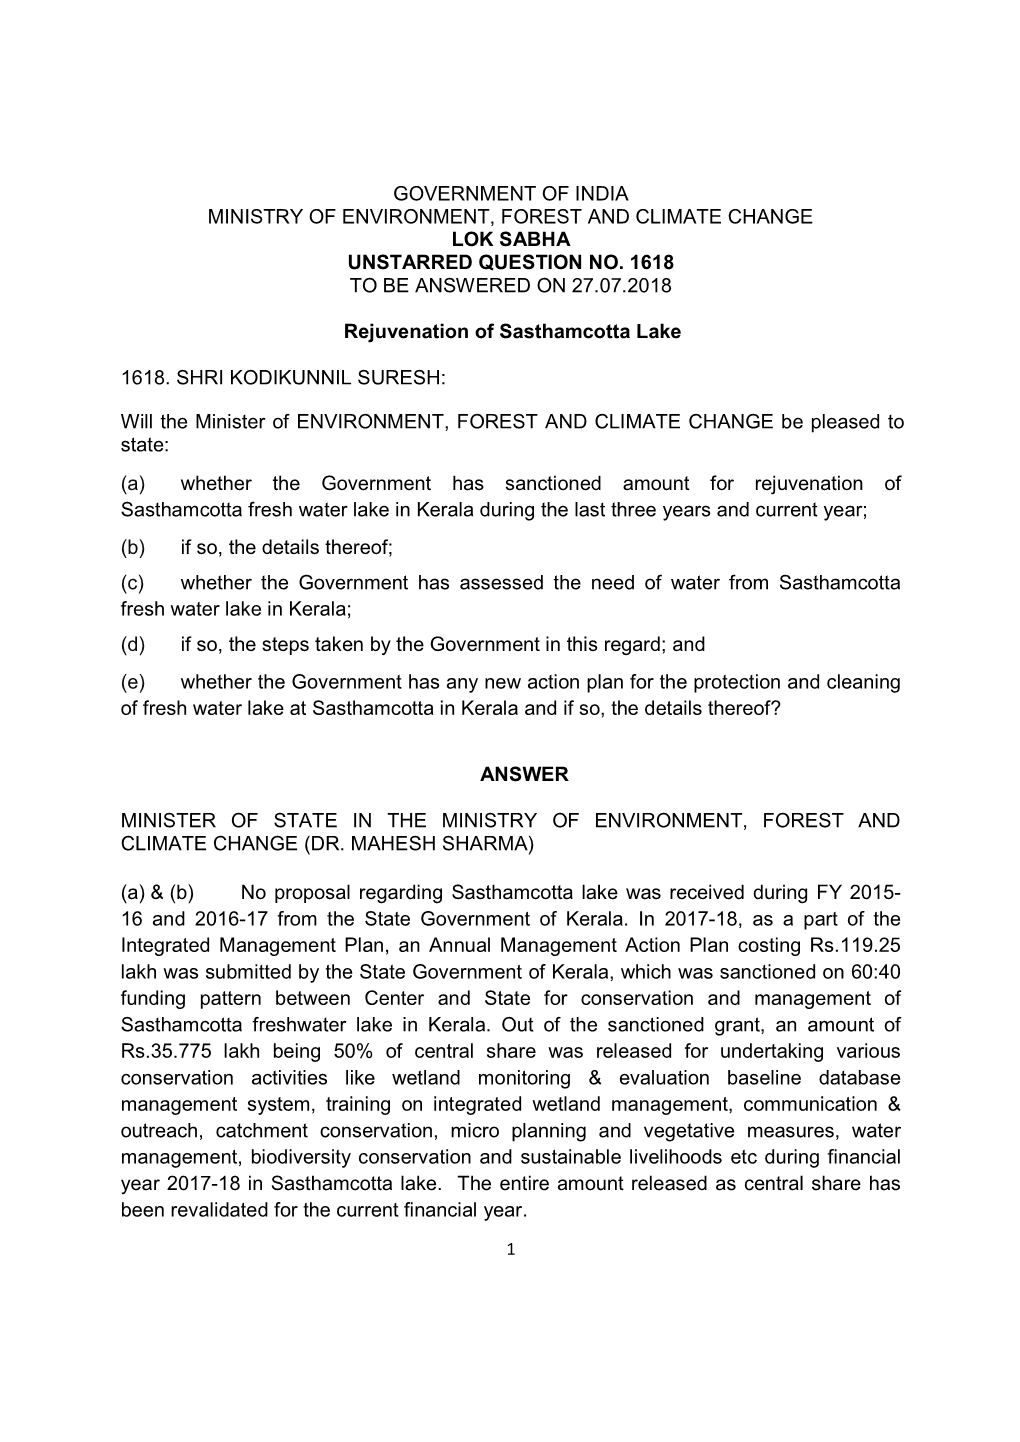 Government of India Ministry of Environment, Forest and Climate Change Lok Sabha Unstarred Question No